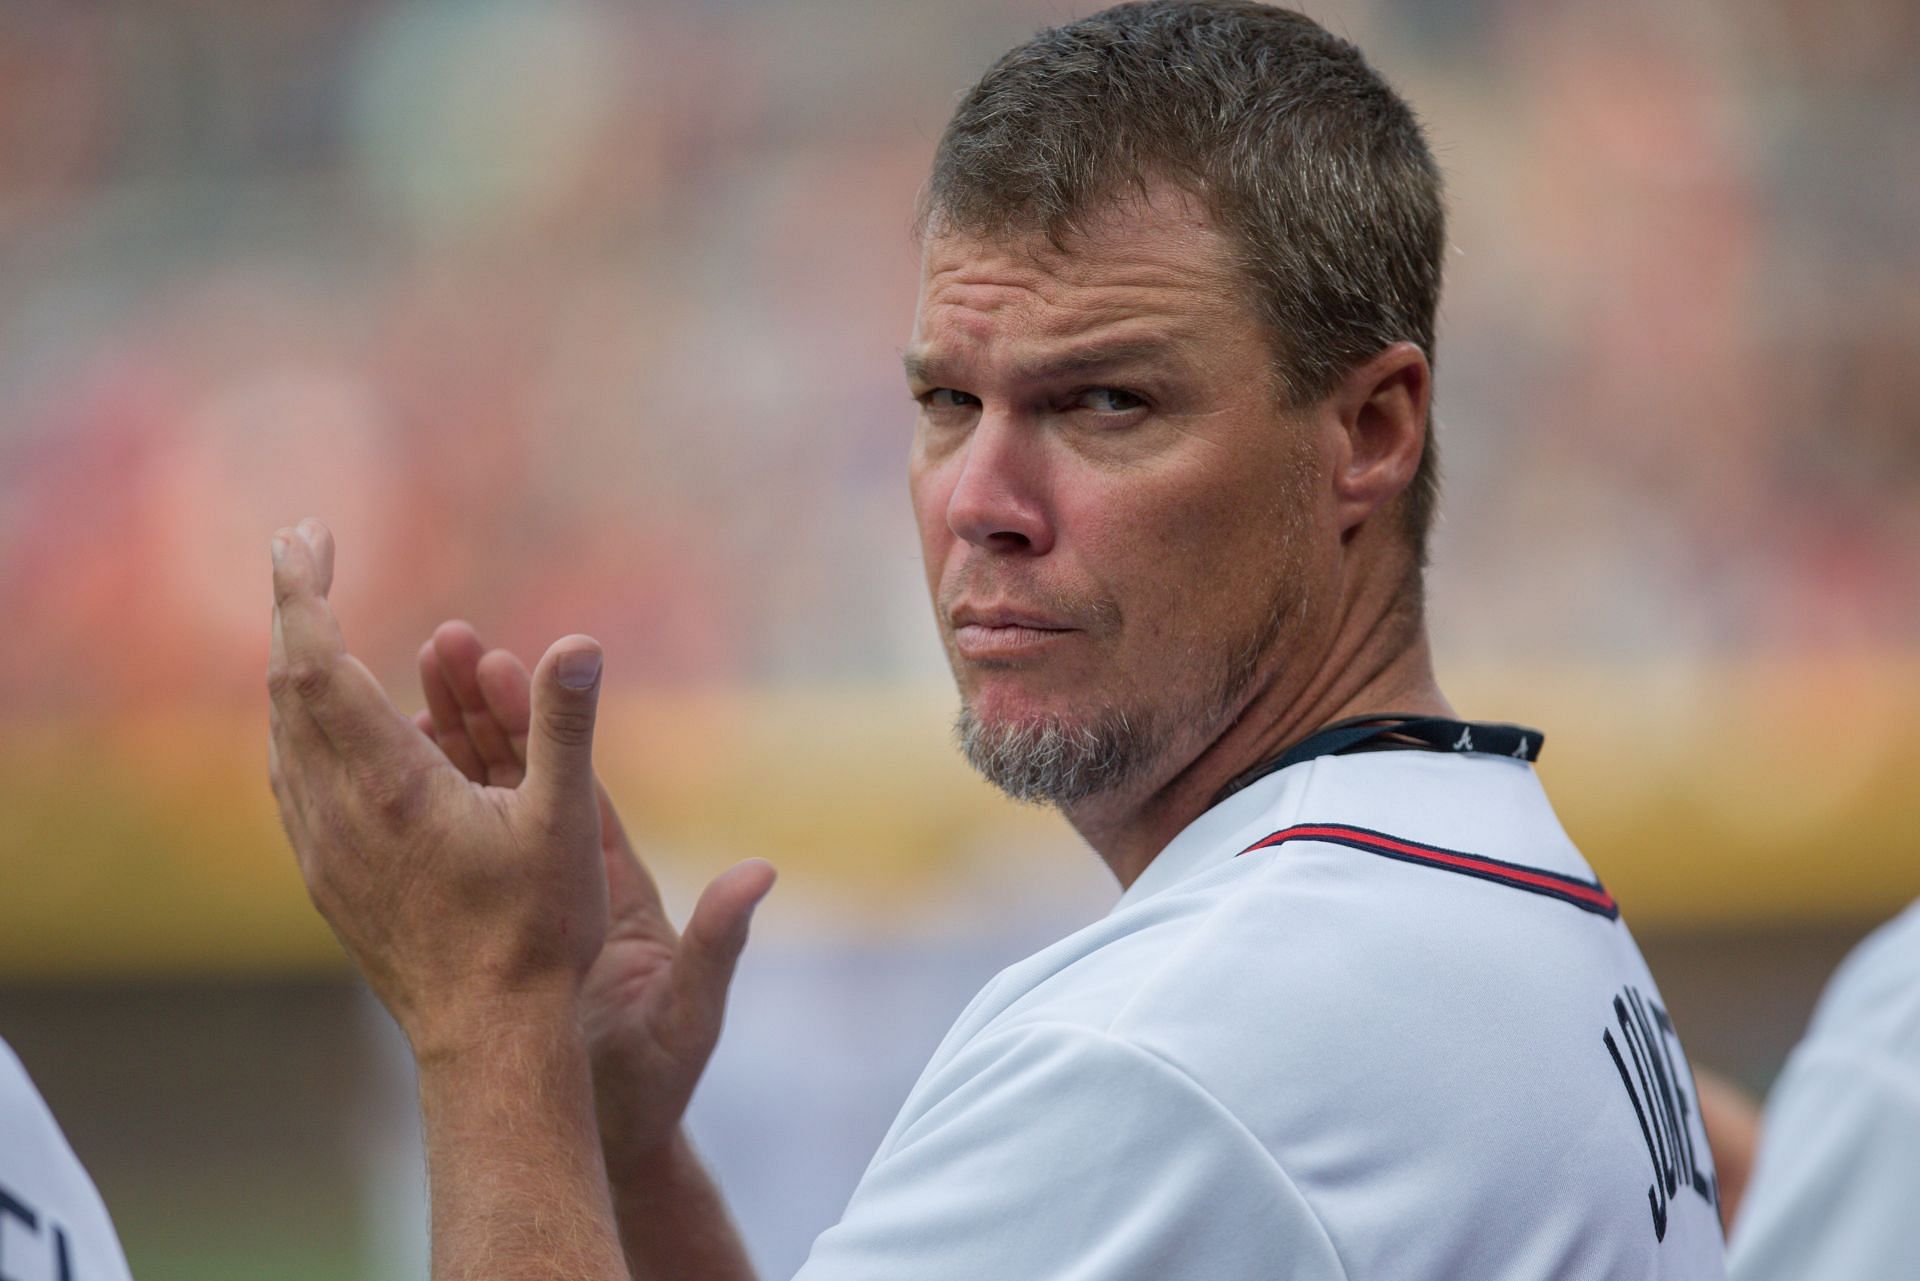 Chipper Jones trying not to strike out with third wife